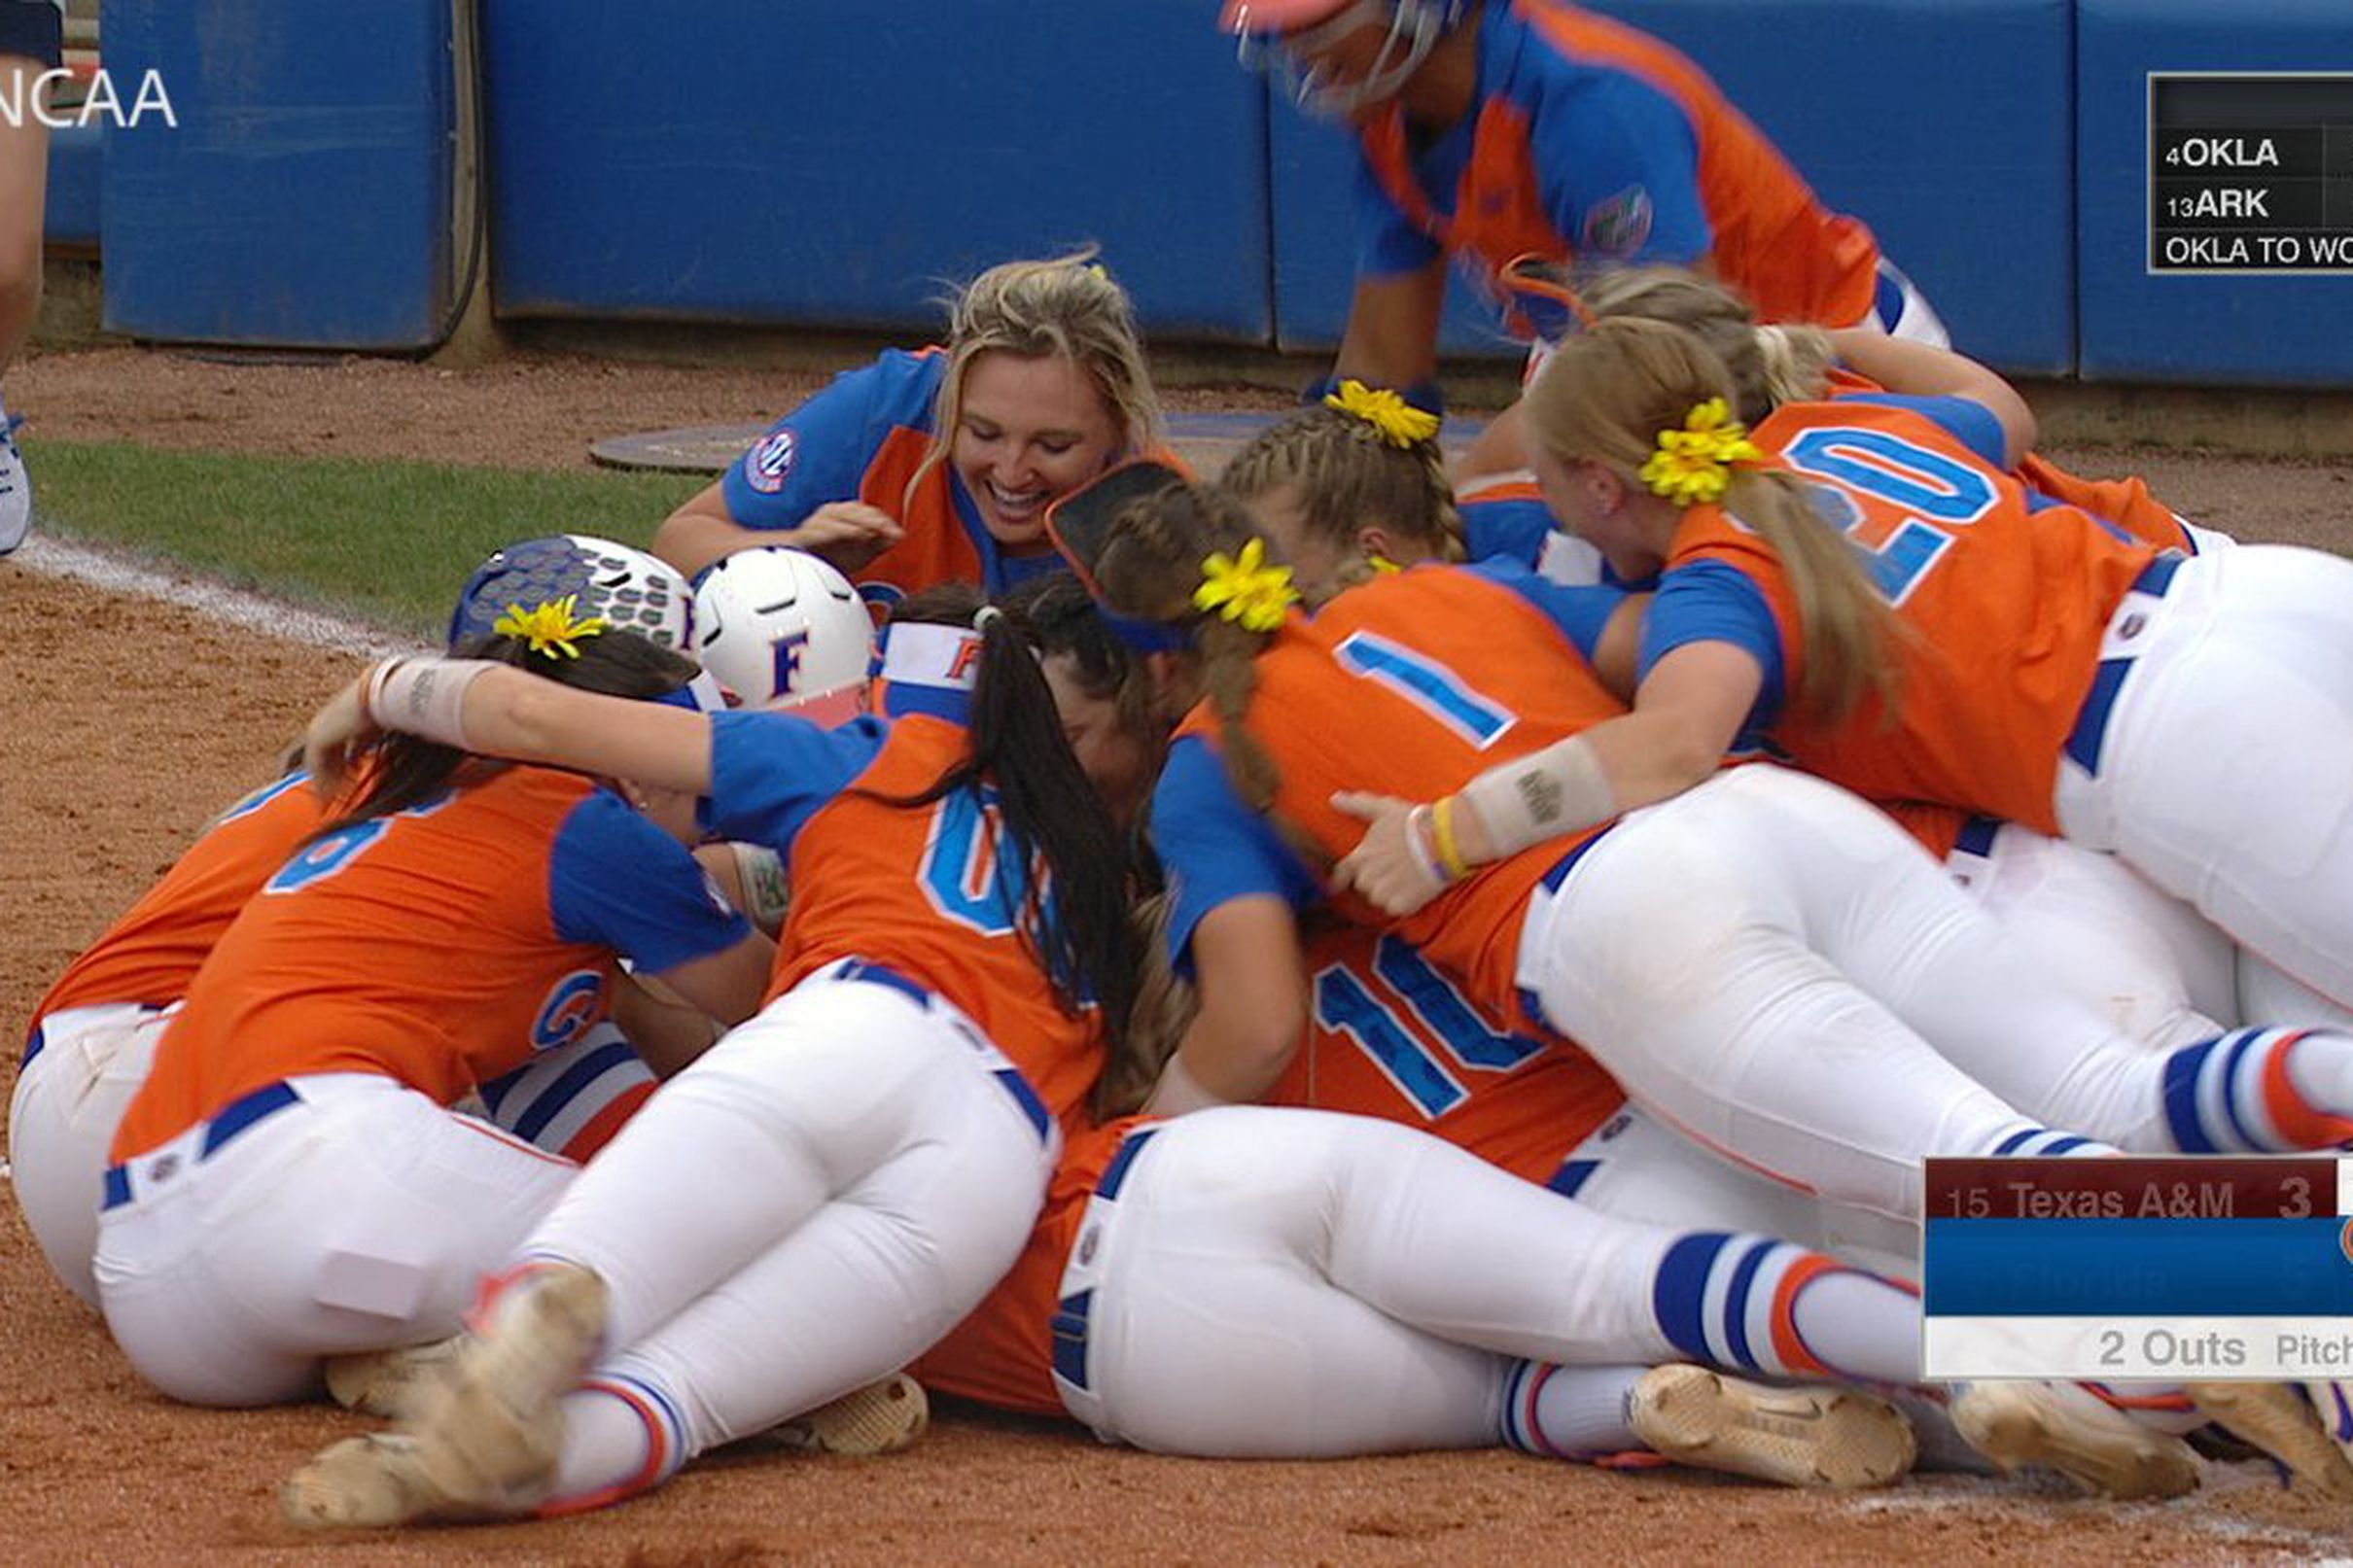 Florida hits walkoff homer to advance to Women’s College World Series